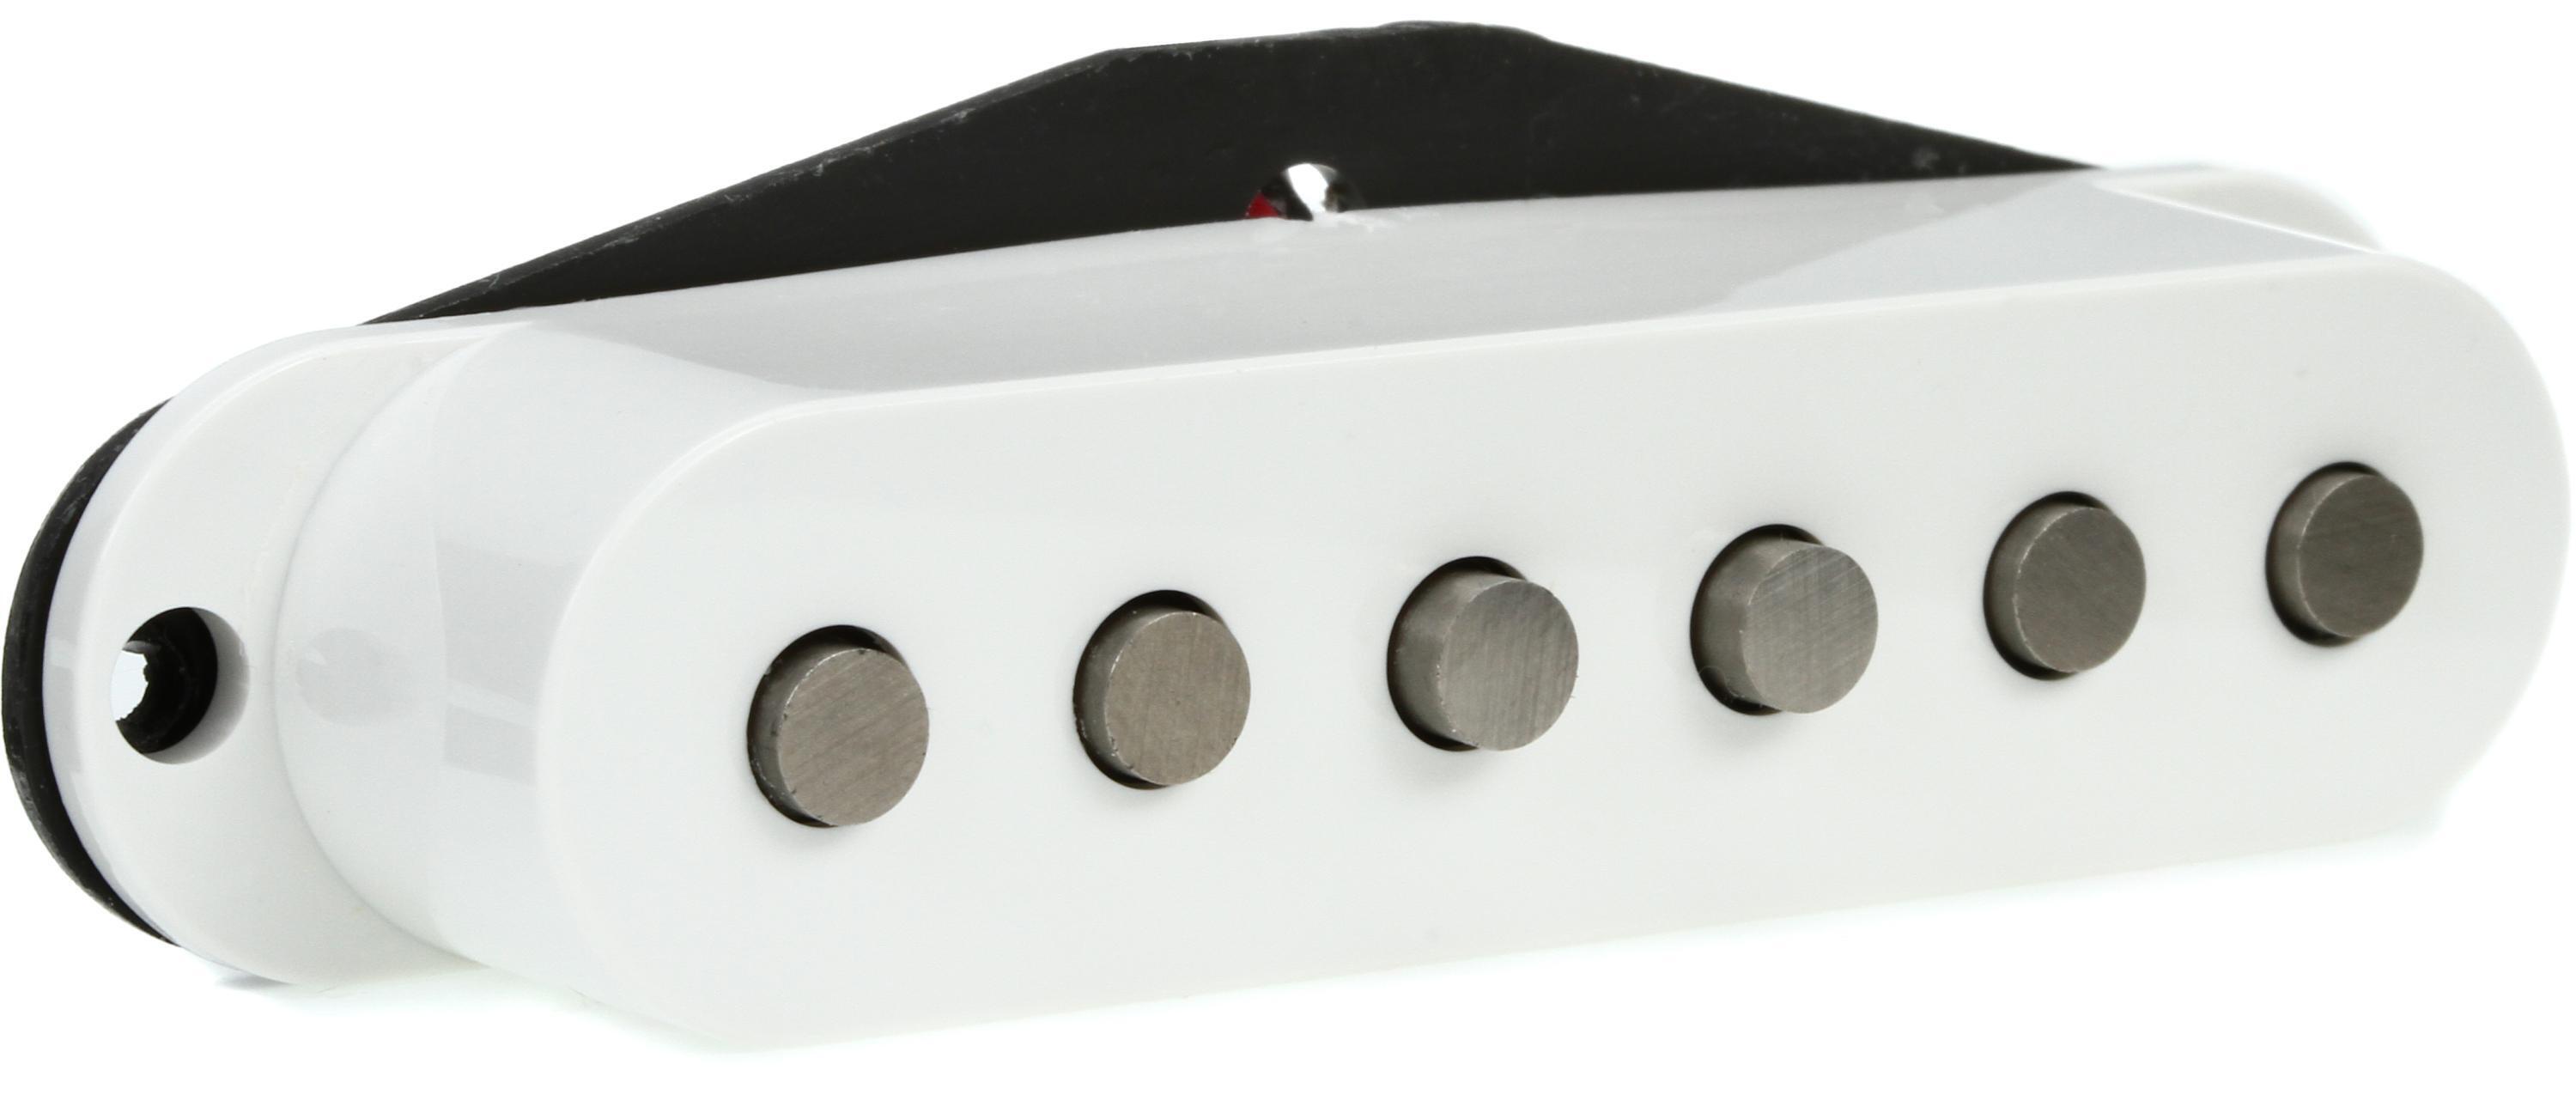 DiMarzio HS-2 Stacked Hum-canceling Strat Pickup - White | Sweetwater